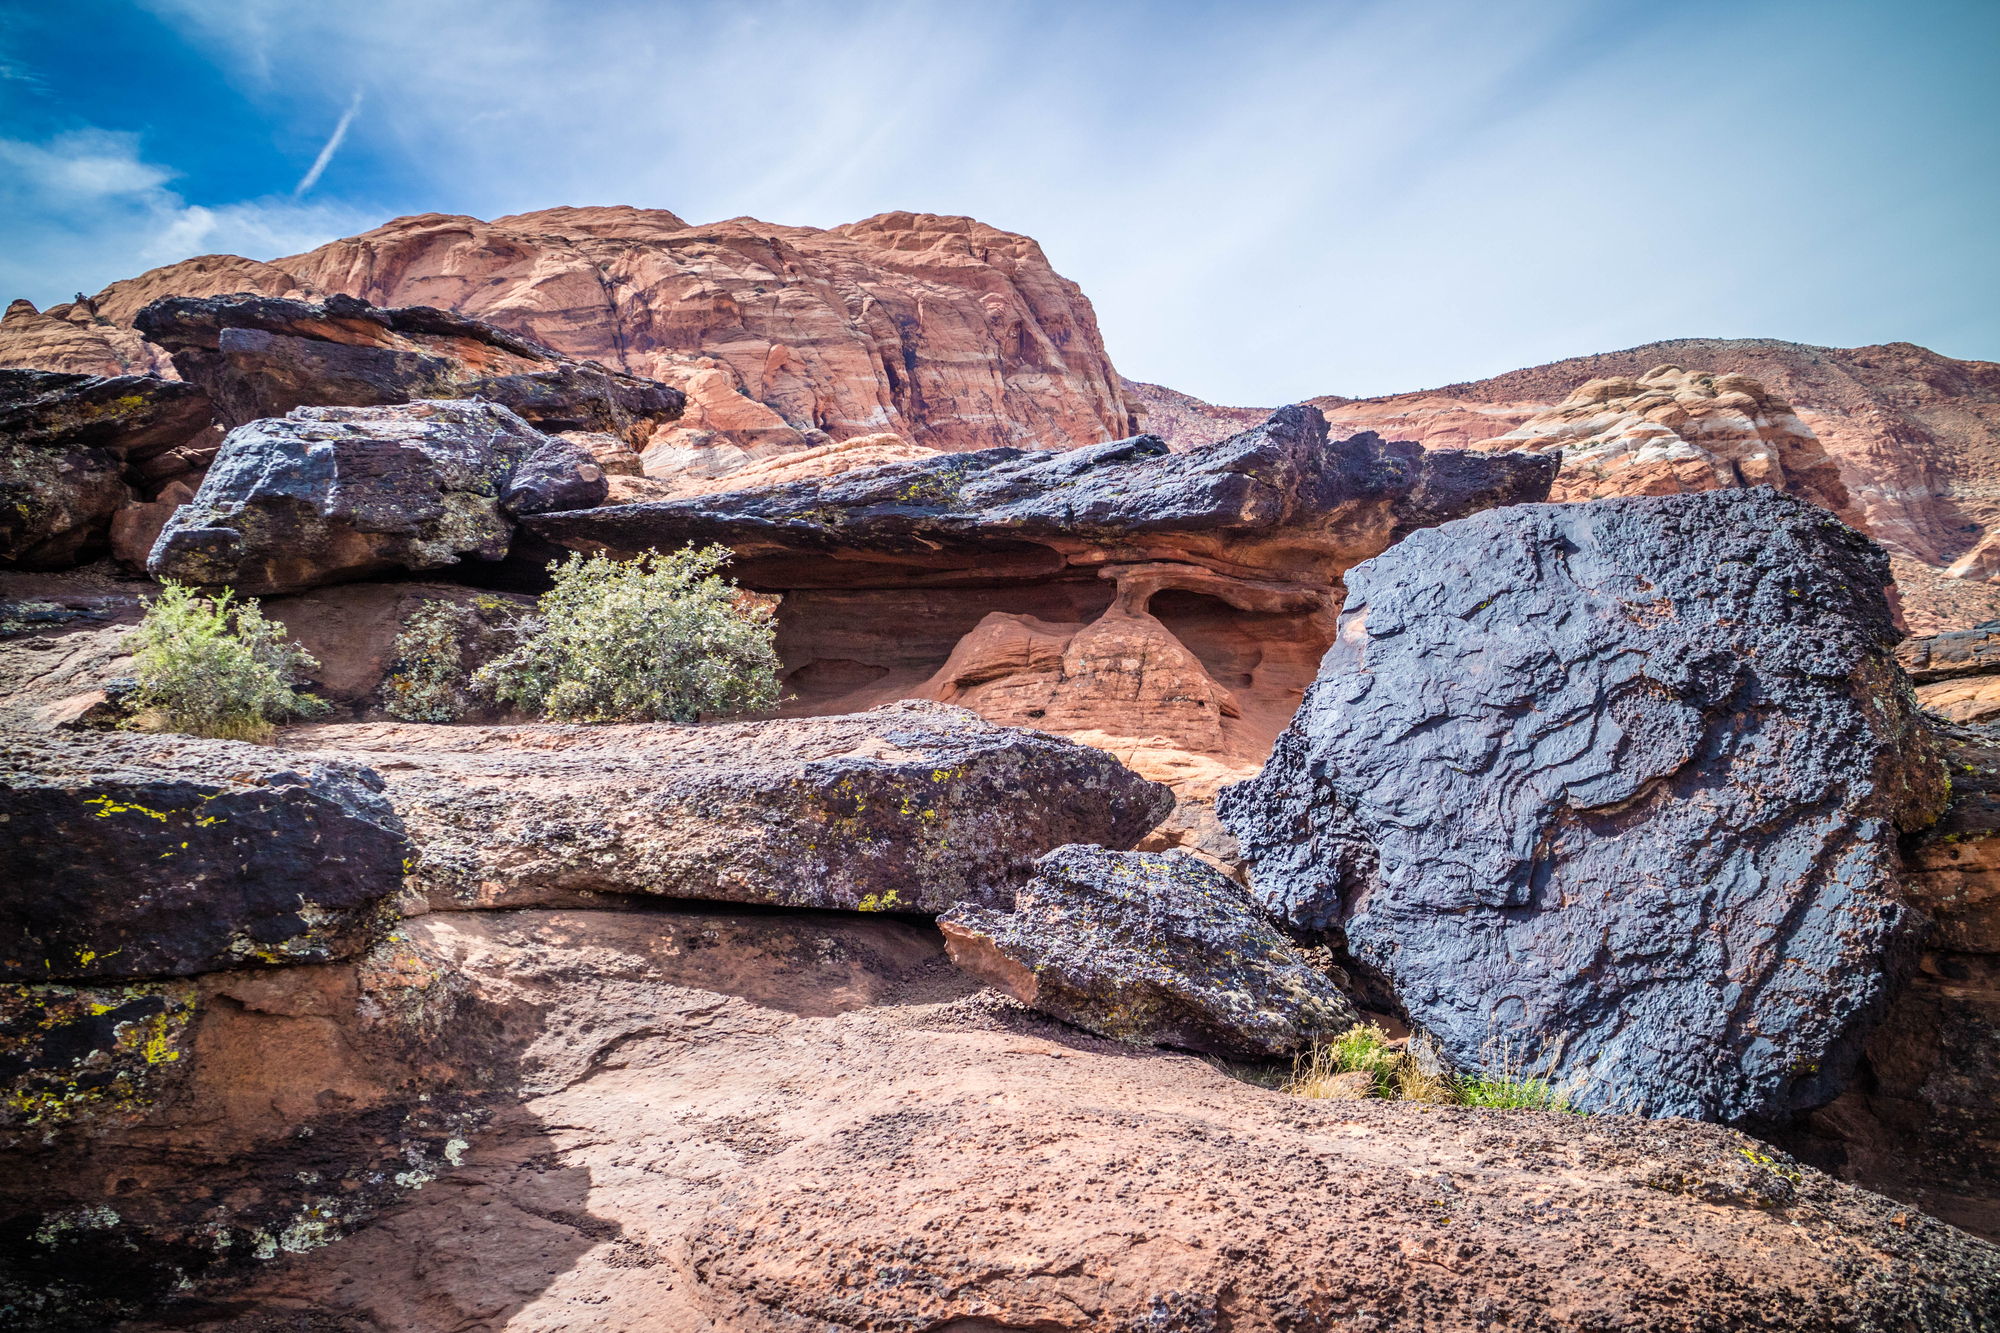 A spectacular view of rock formation in Snow Canyon State Park FemaleHiker